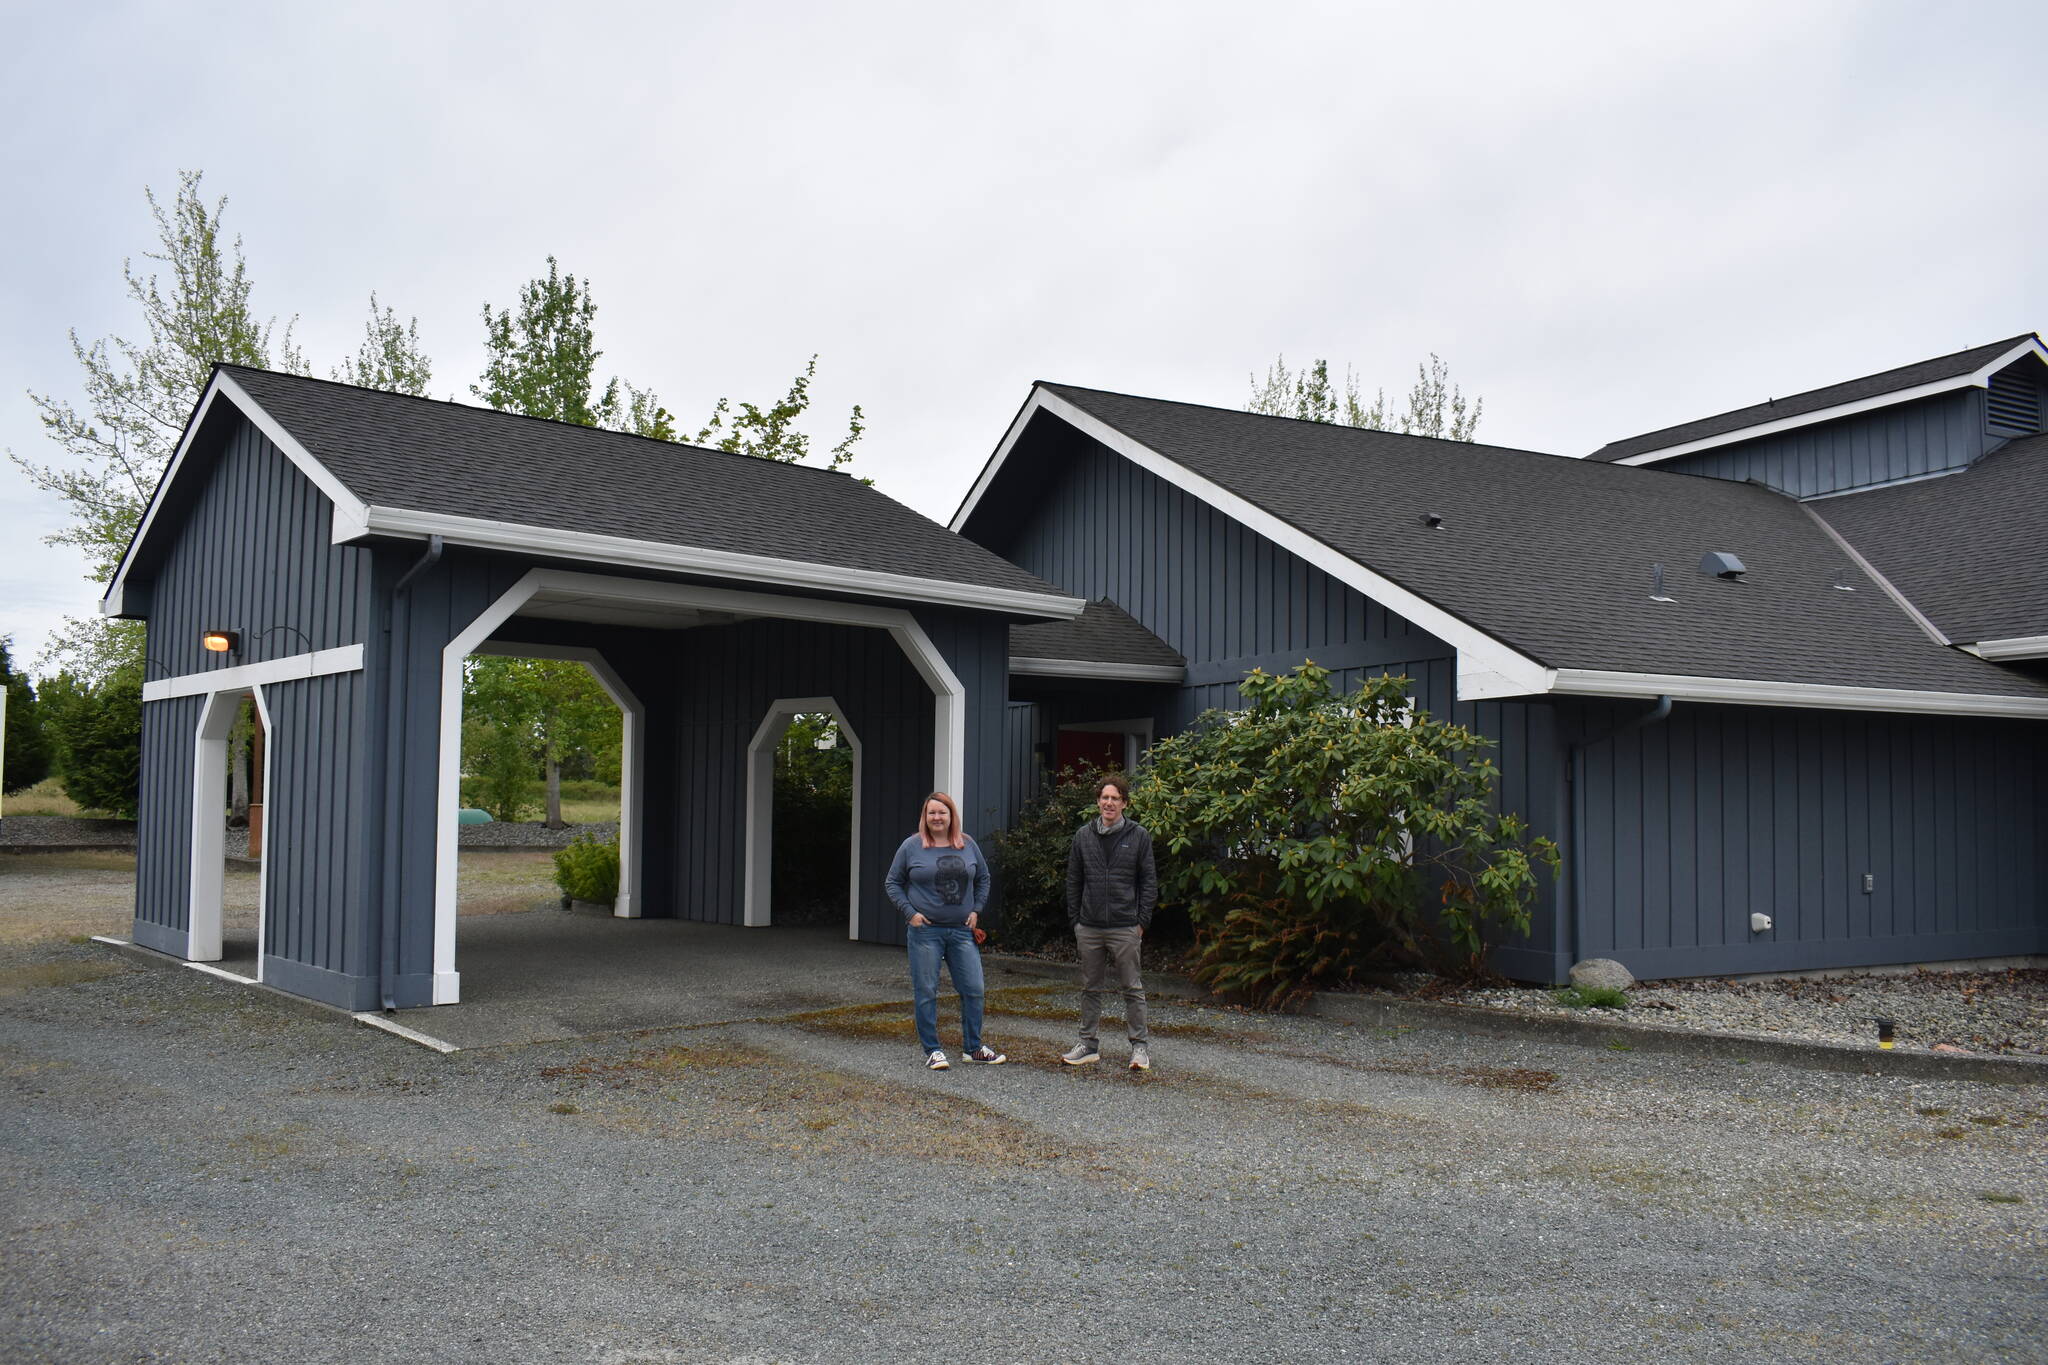 The former Jehovah’s Witness church in Central Whidbey will be turned into a homeless shelter.